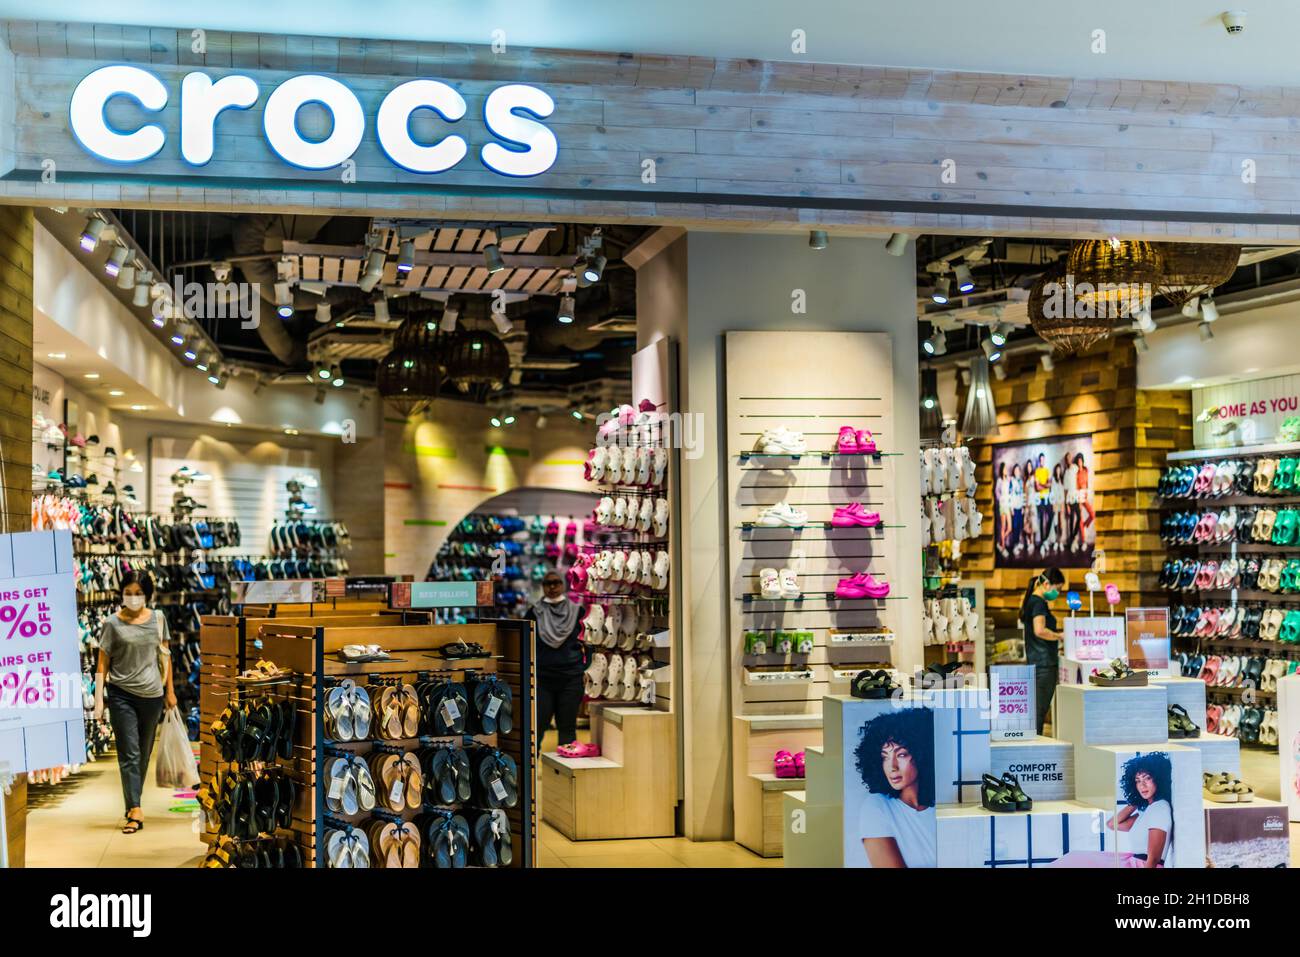 Crocs For Sale High Resolution Stock Photography and Images - Alamy